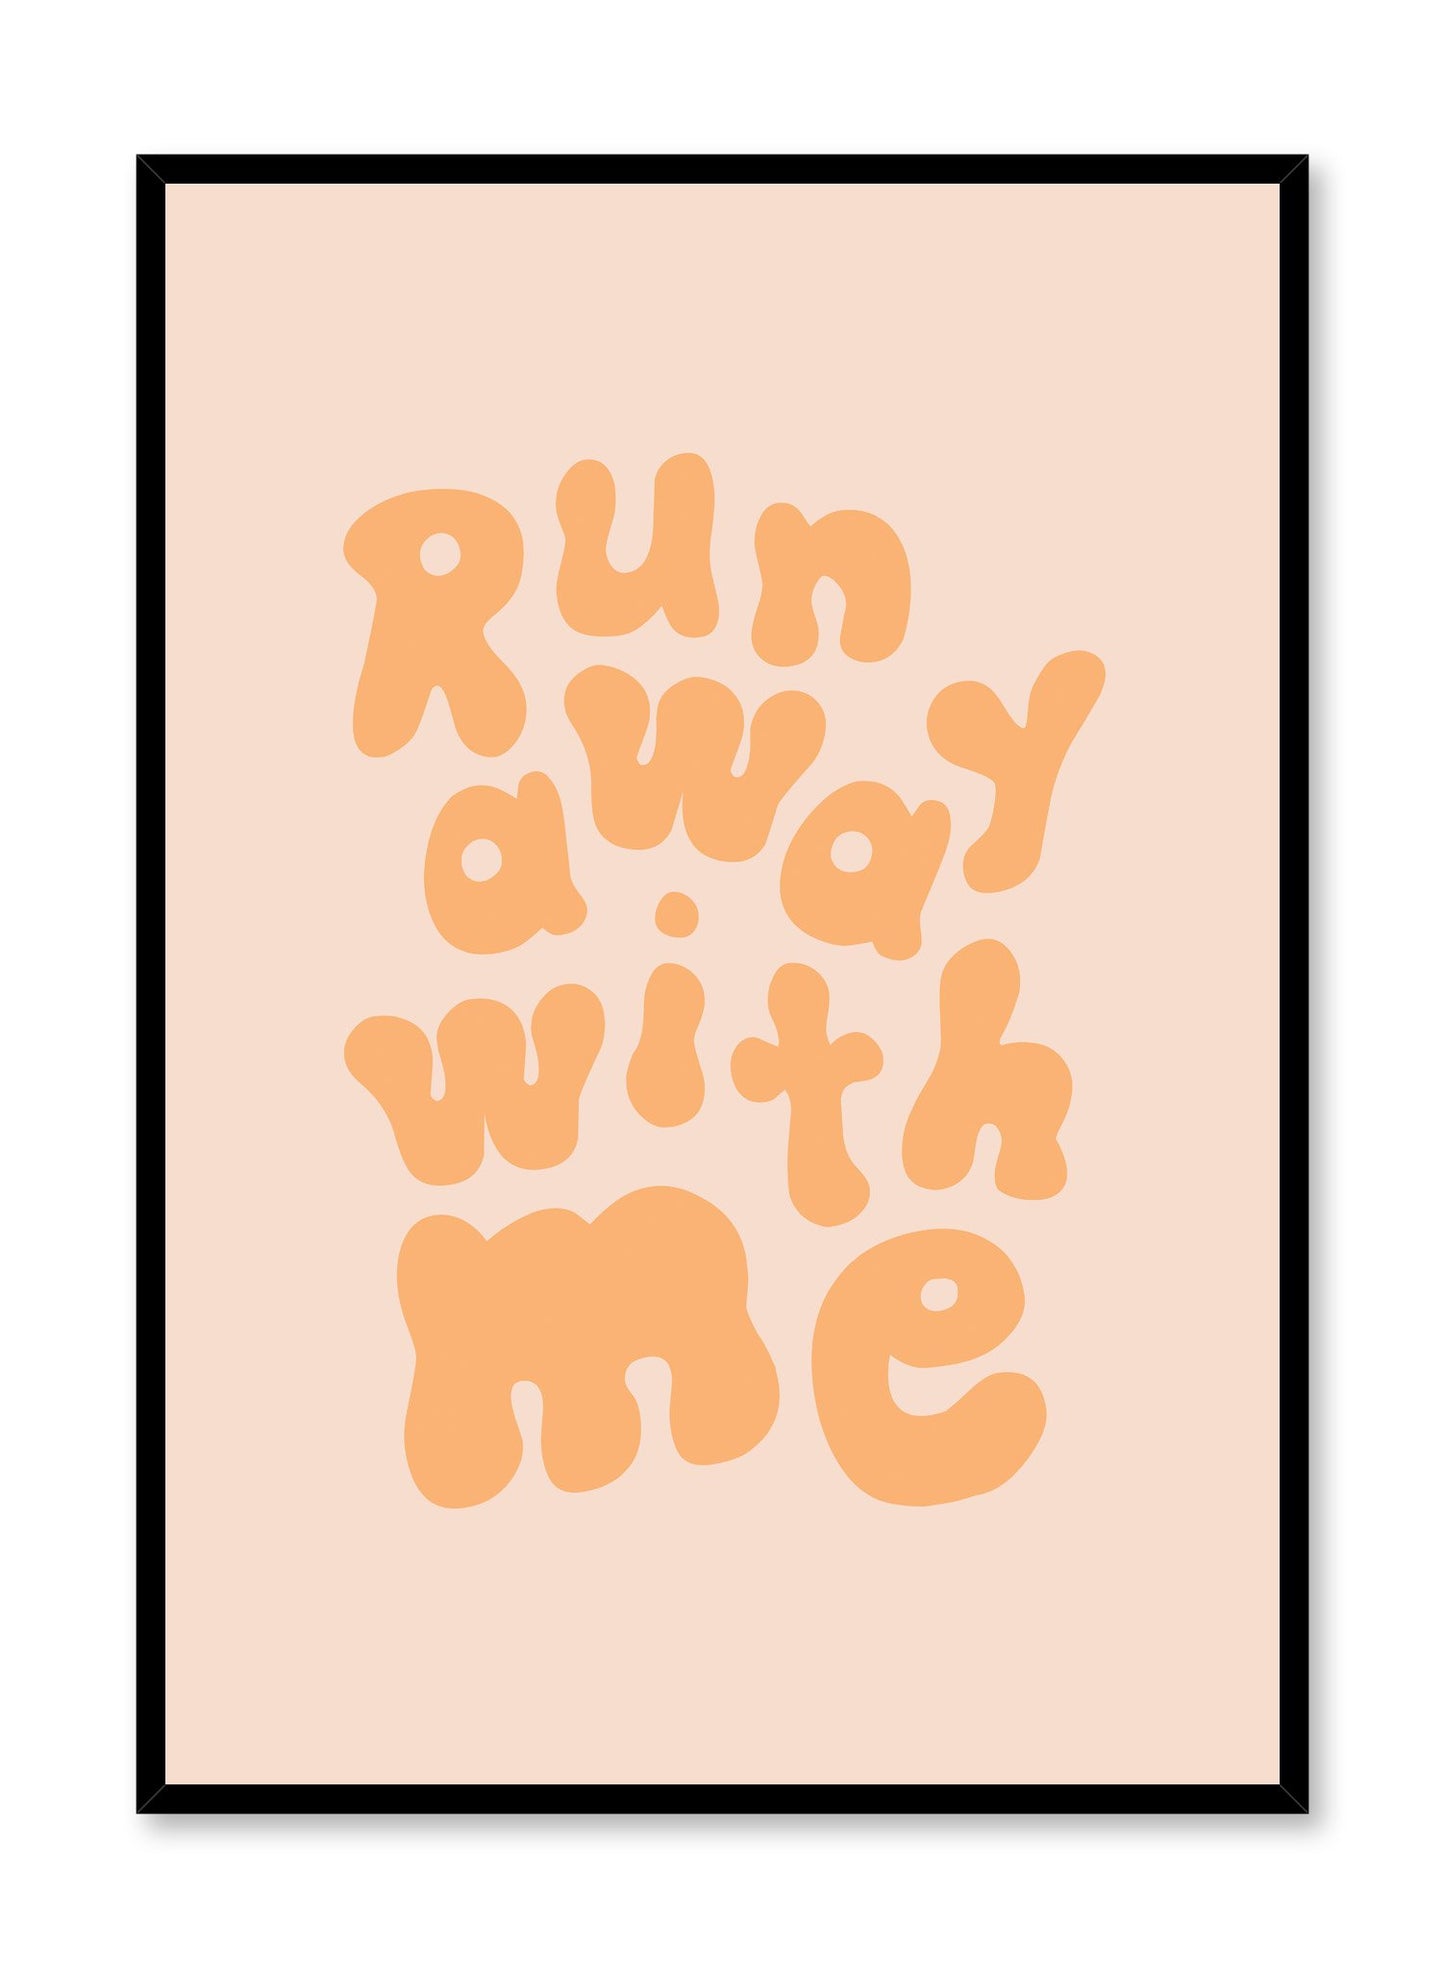 Mid-century modern typography poster by Opposite Wall with quote of Run Away With Me in Orange